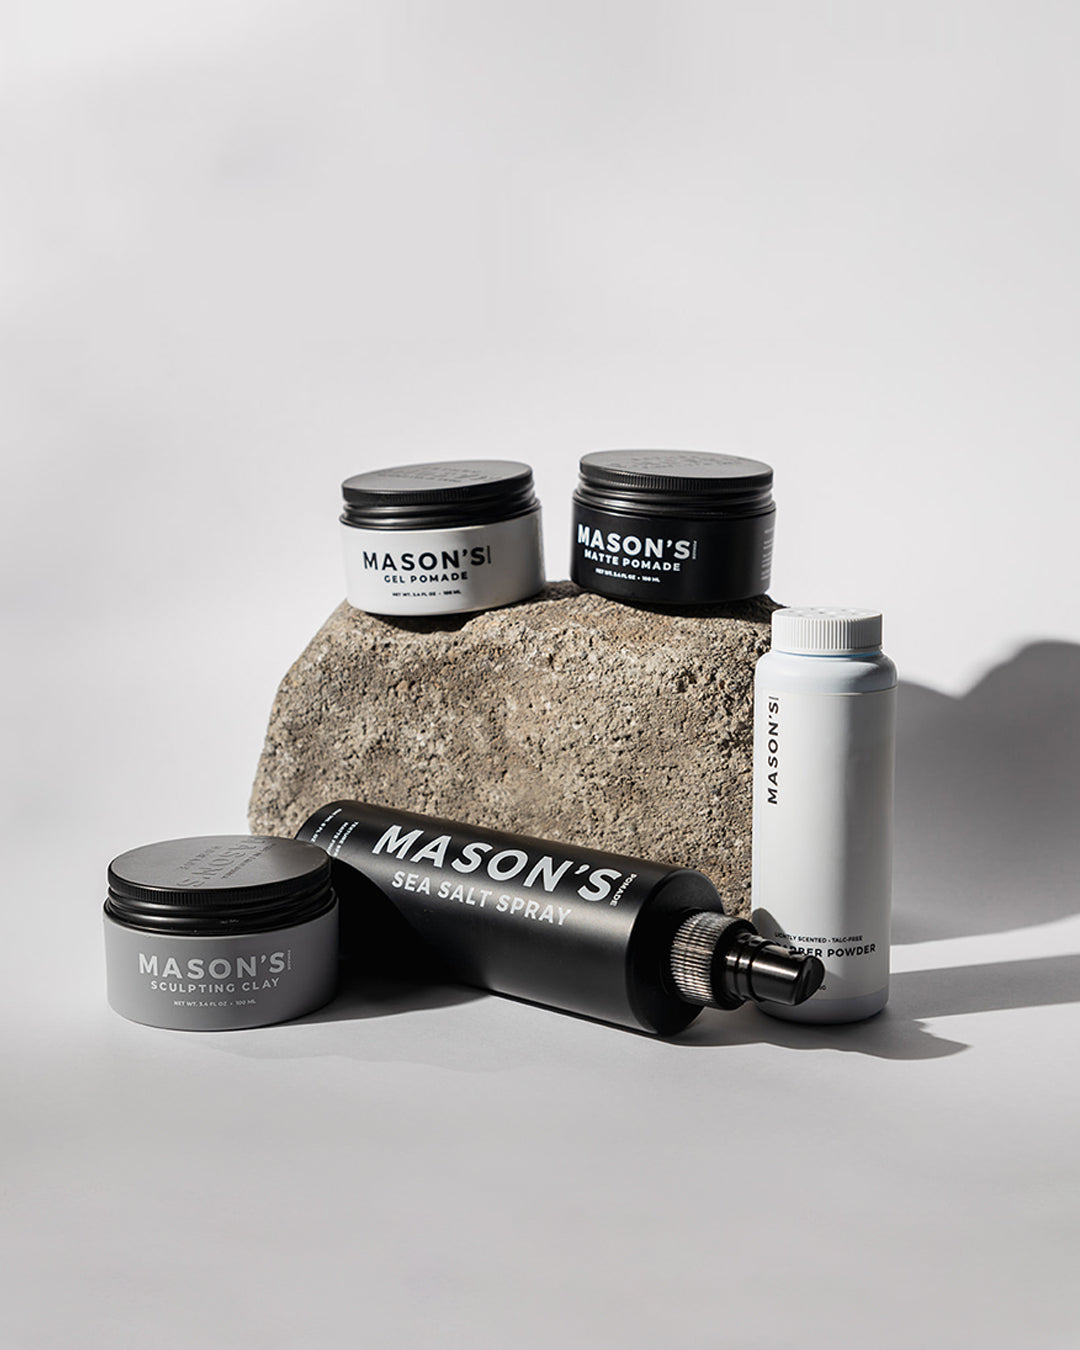 Exclusive Merchandise on Mason's Pomade branded clothing